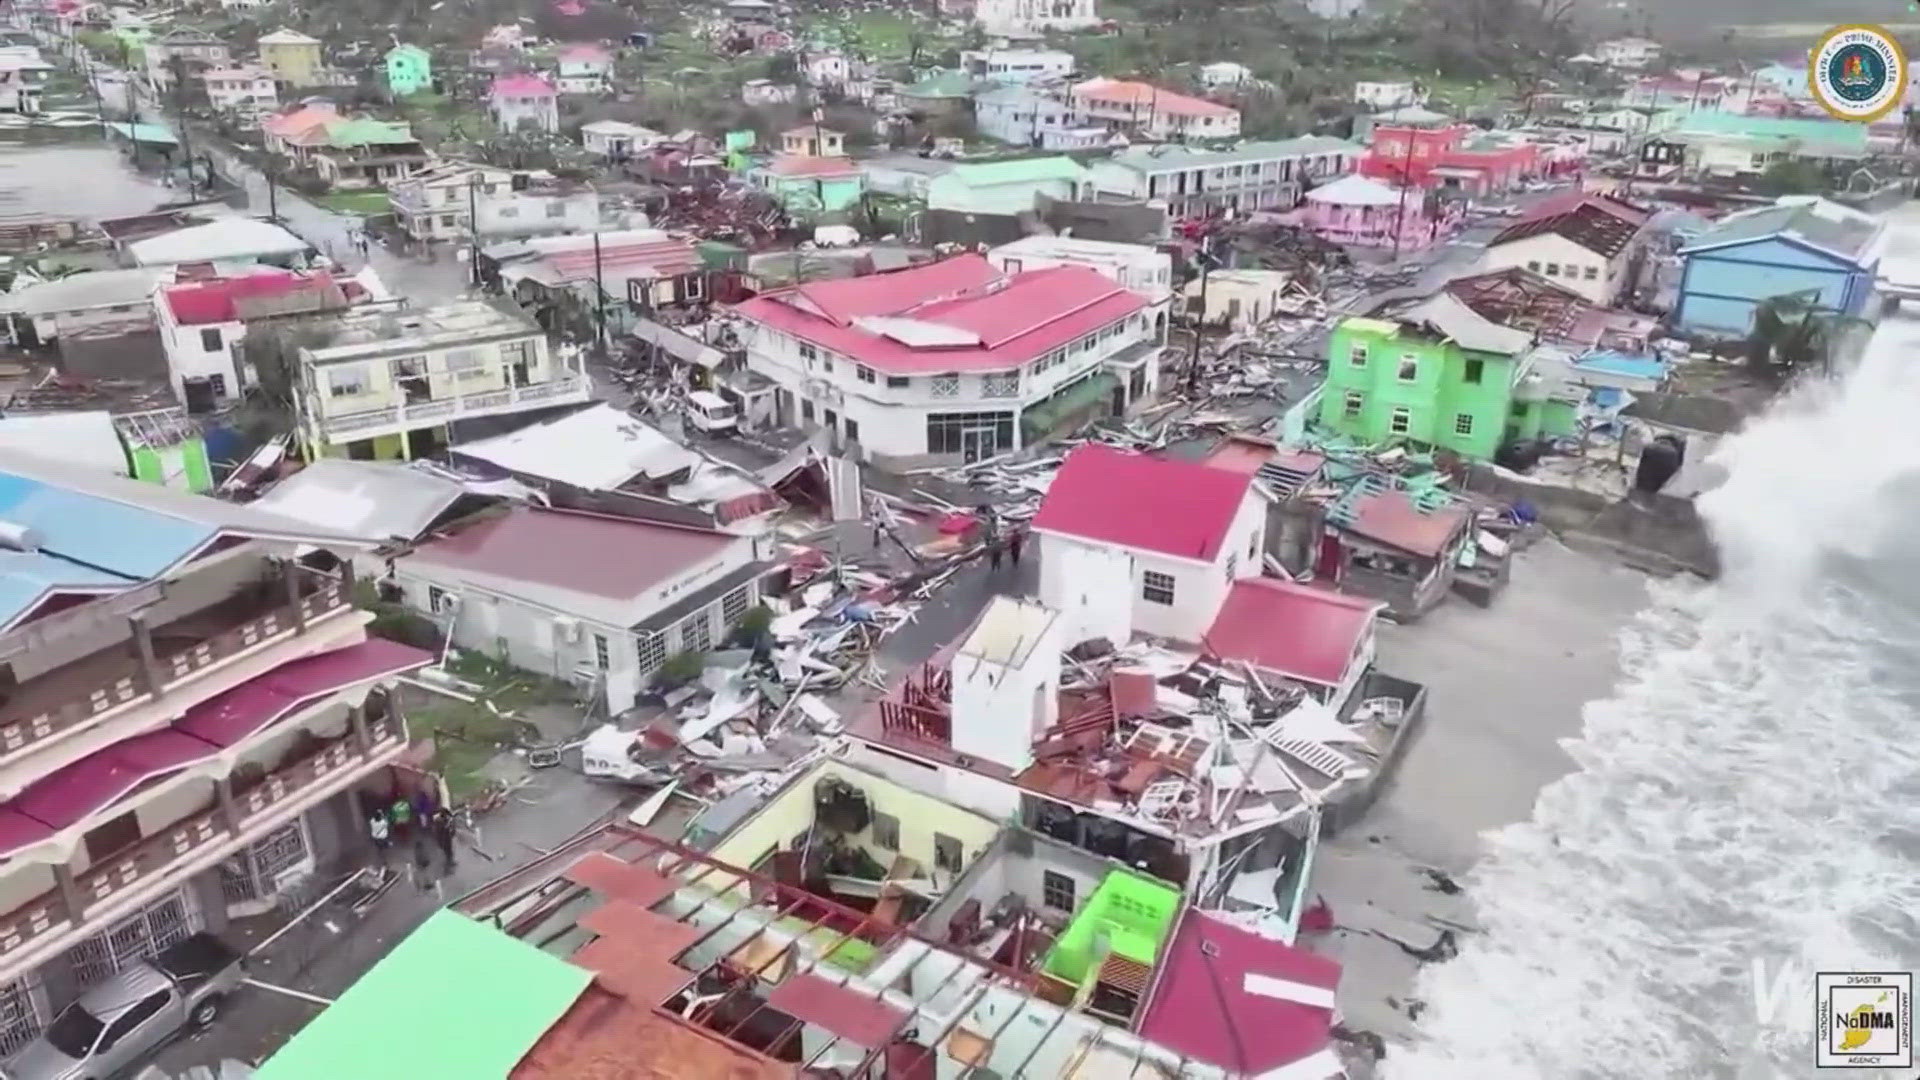 It is the strongest hurricane on record to ever pass through the grenadines.